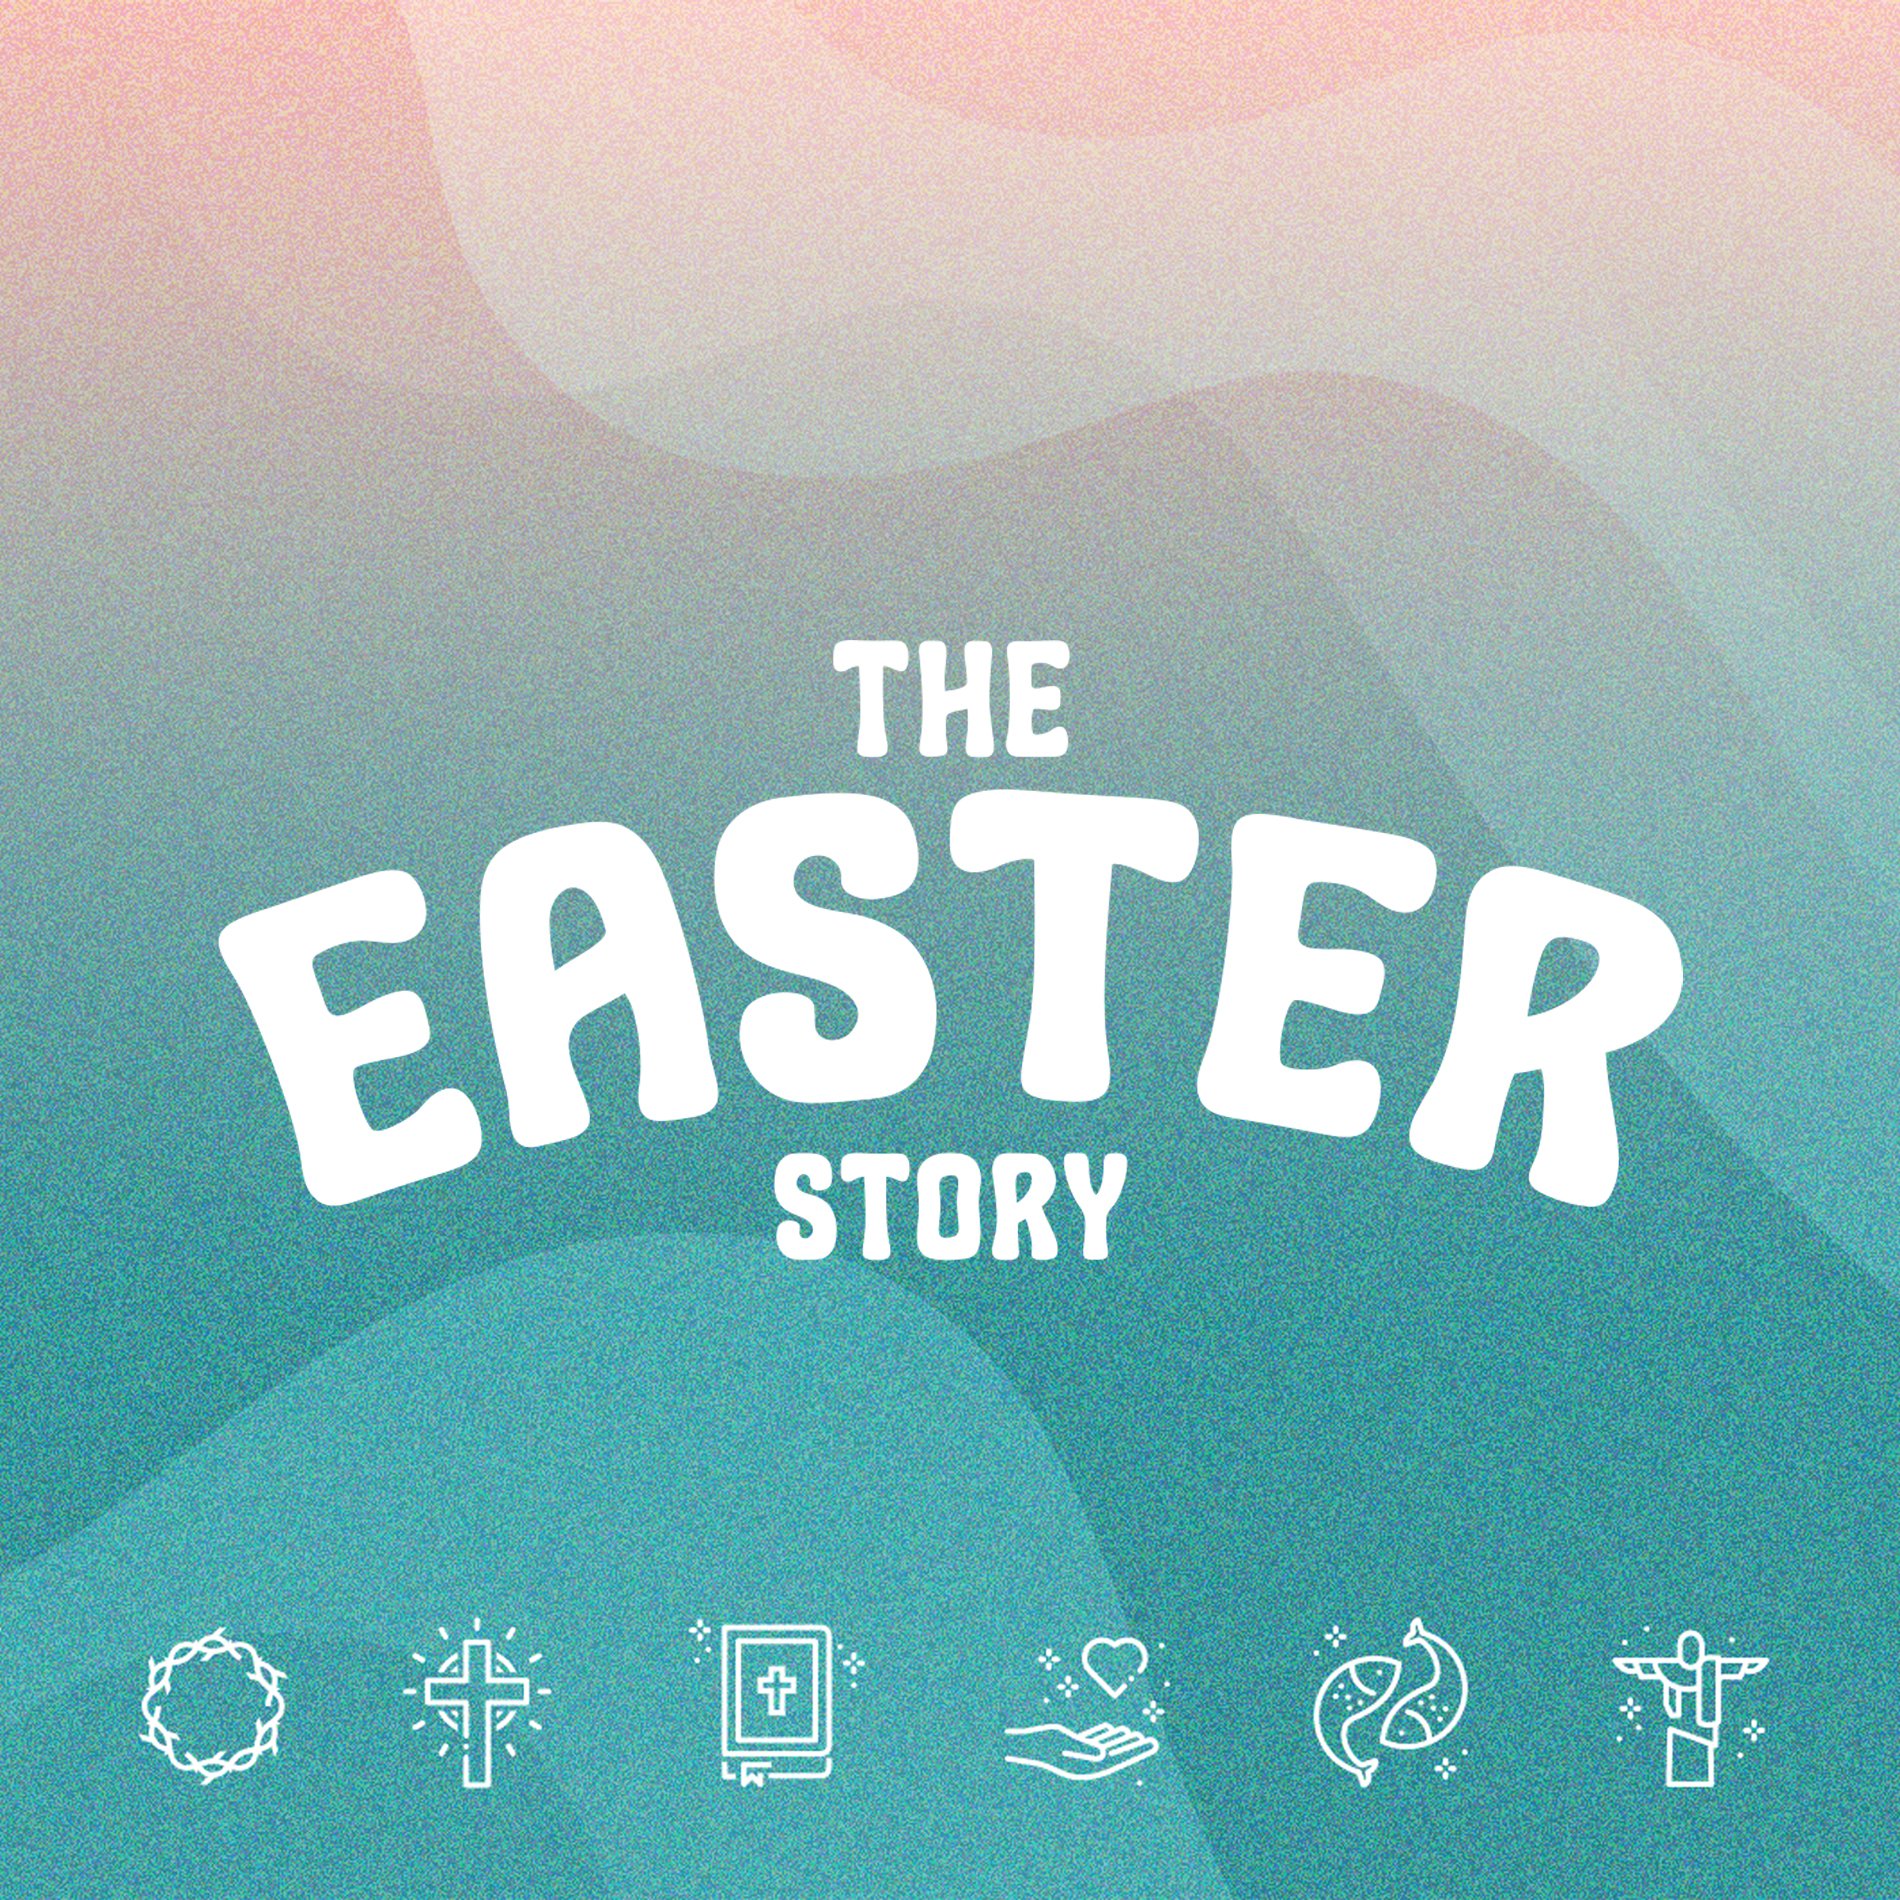 Product image for The Easter Story – Children’s Curriculum